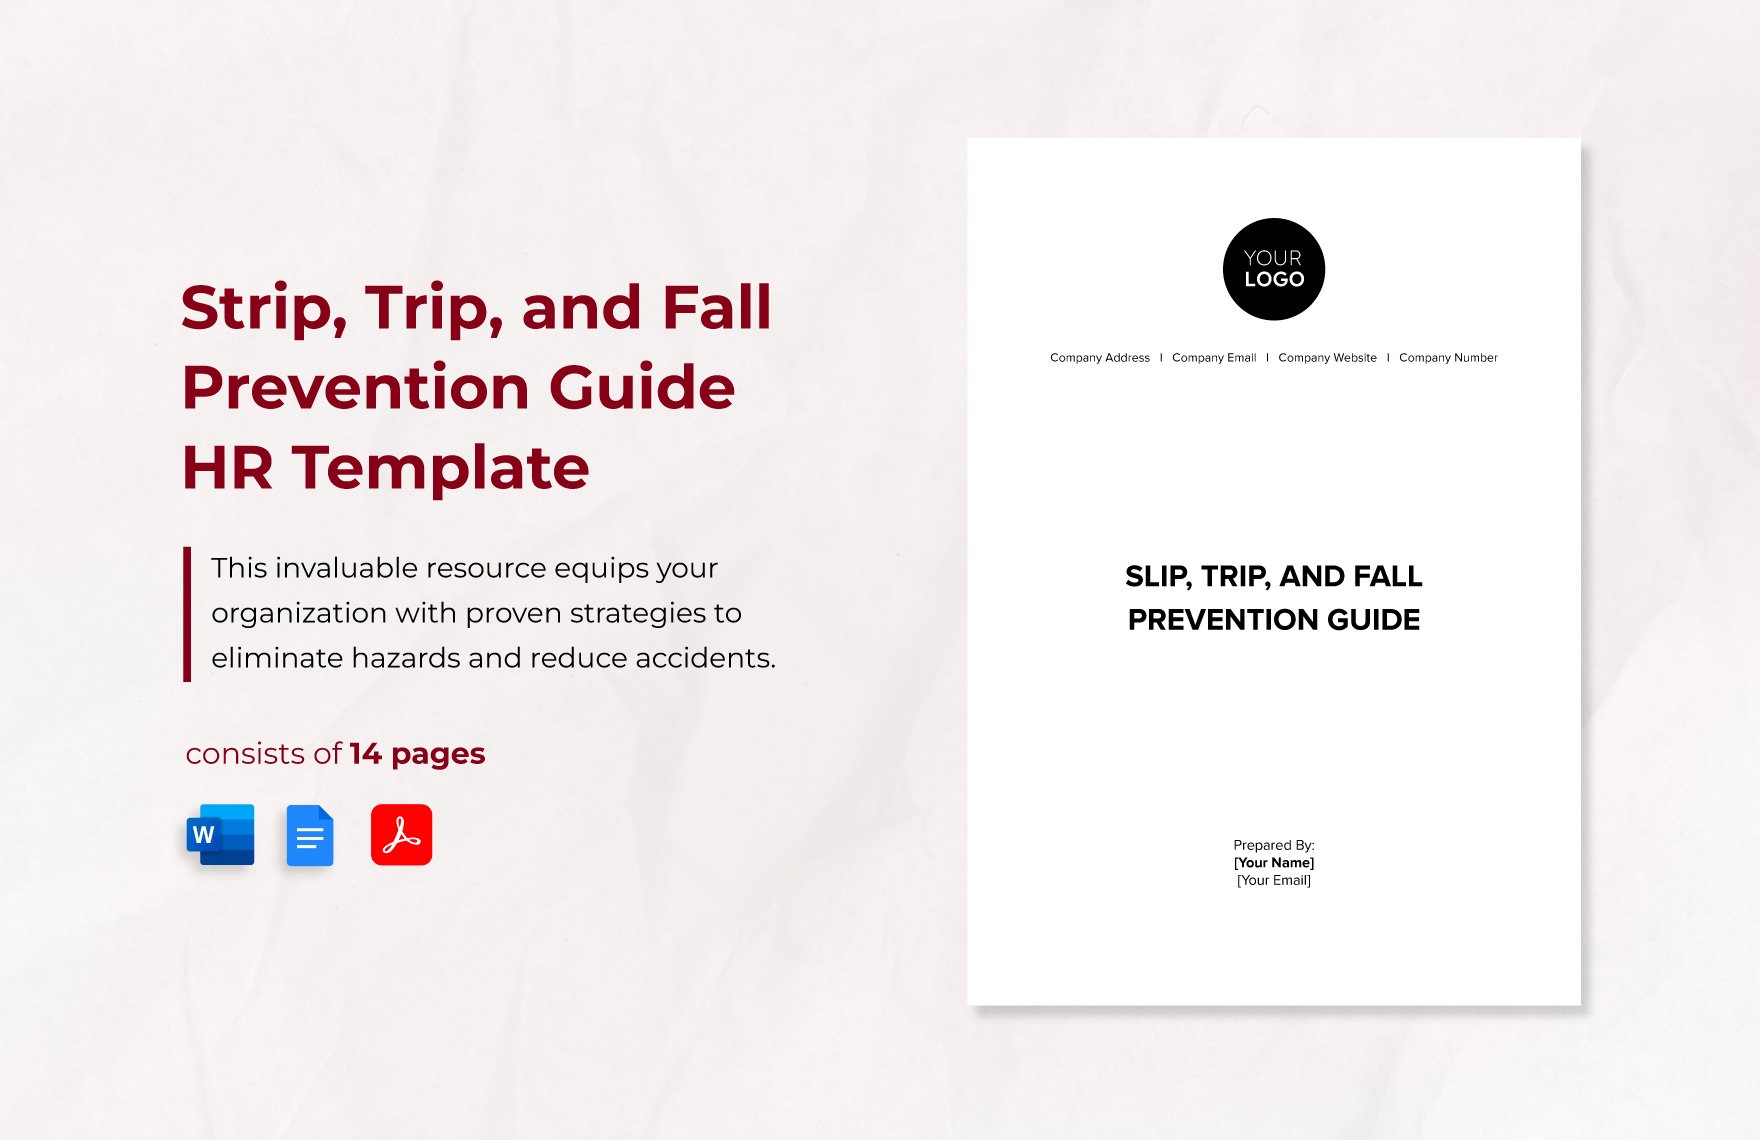 Slip, Trip, and Fall Prevention Guide HR Template